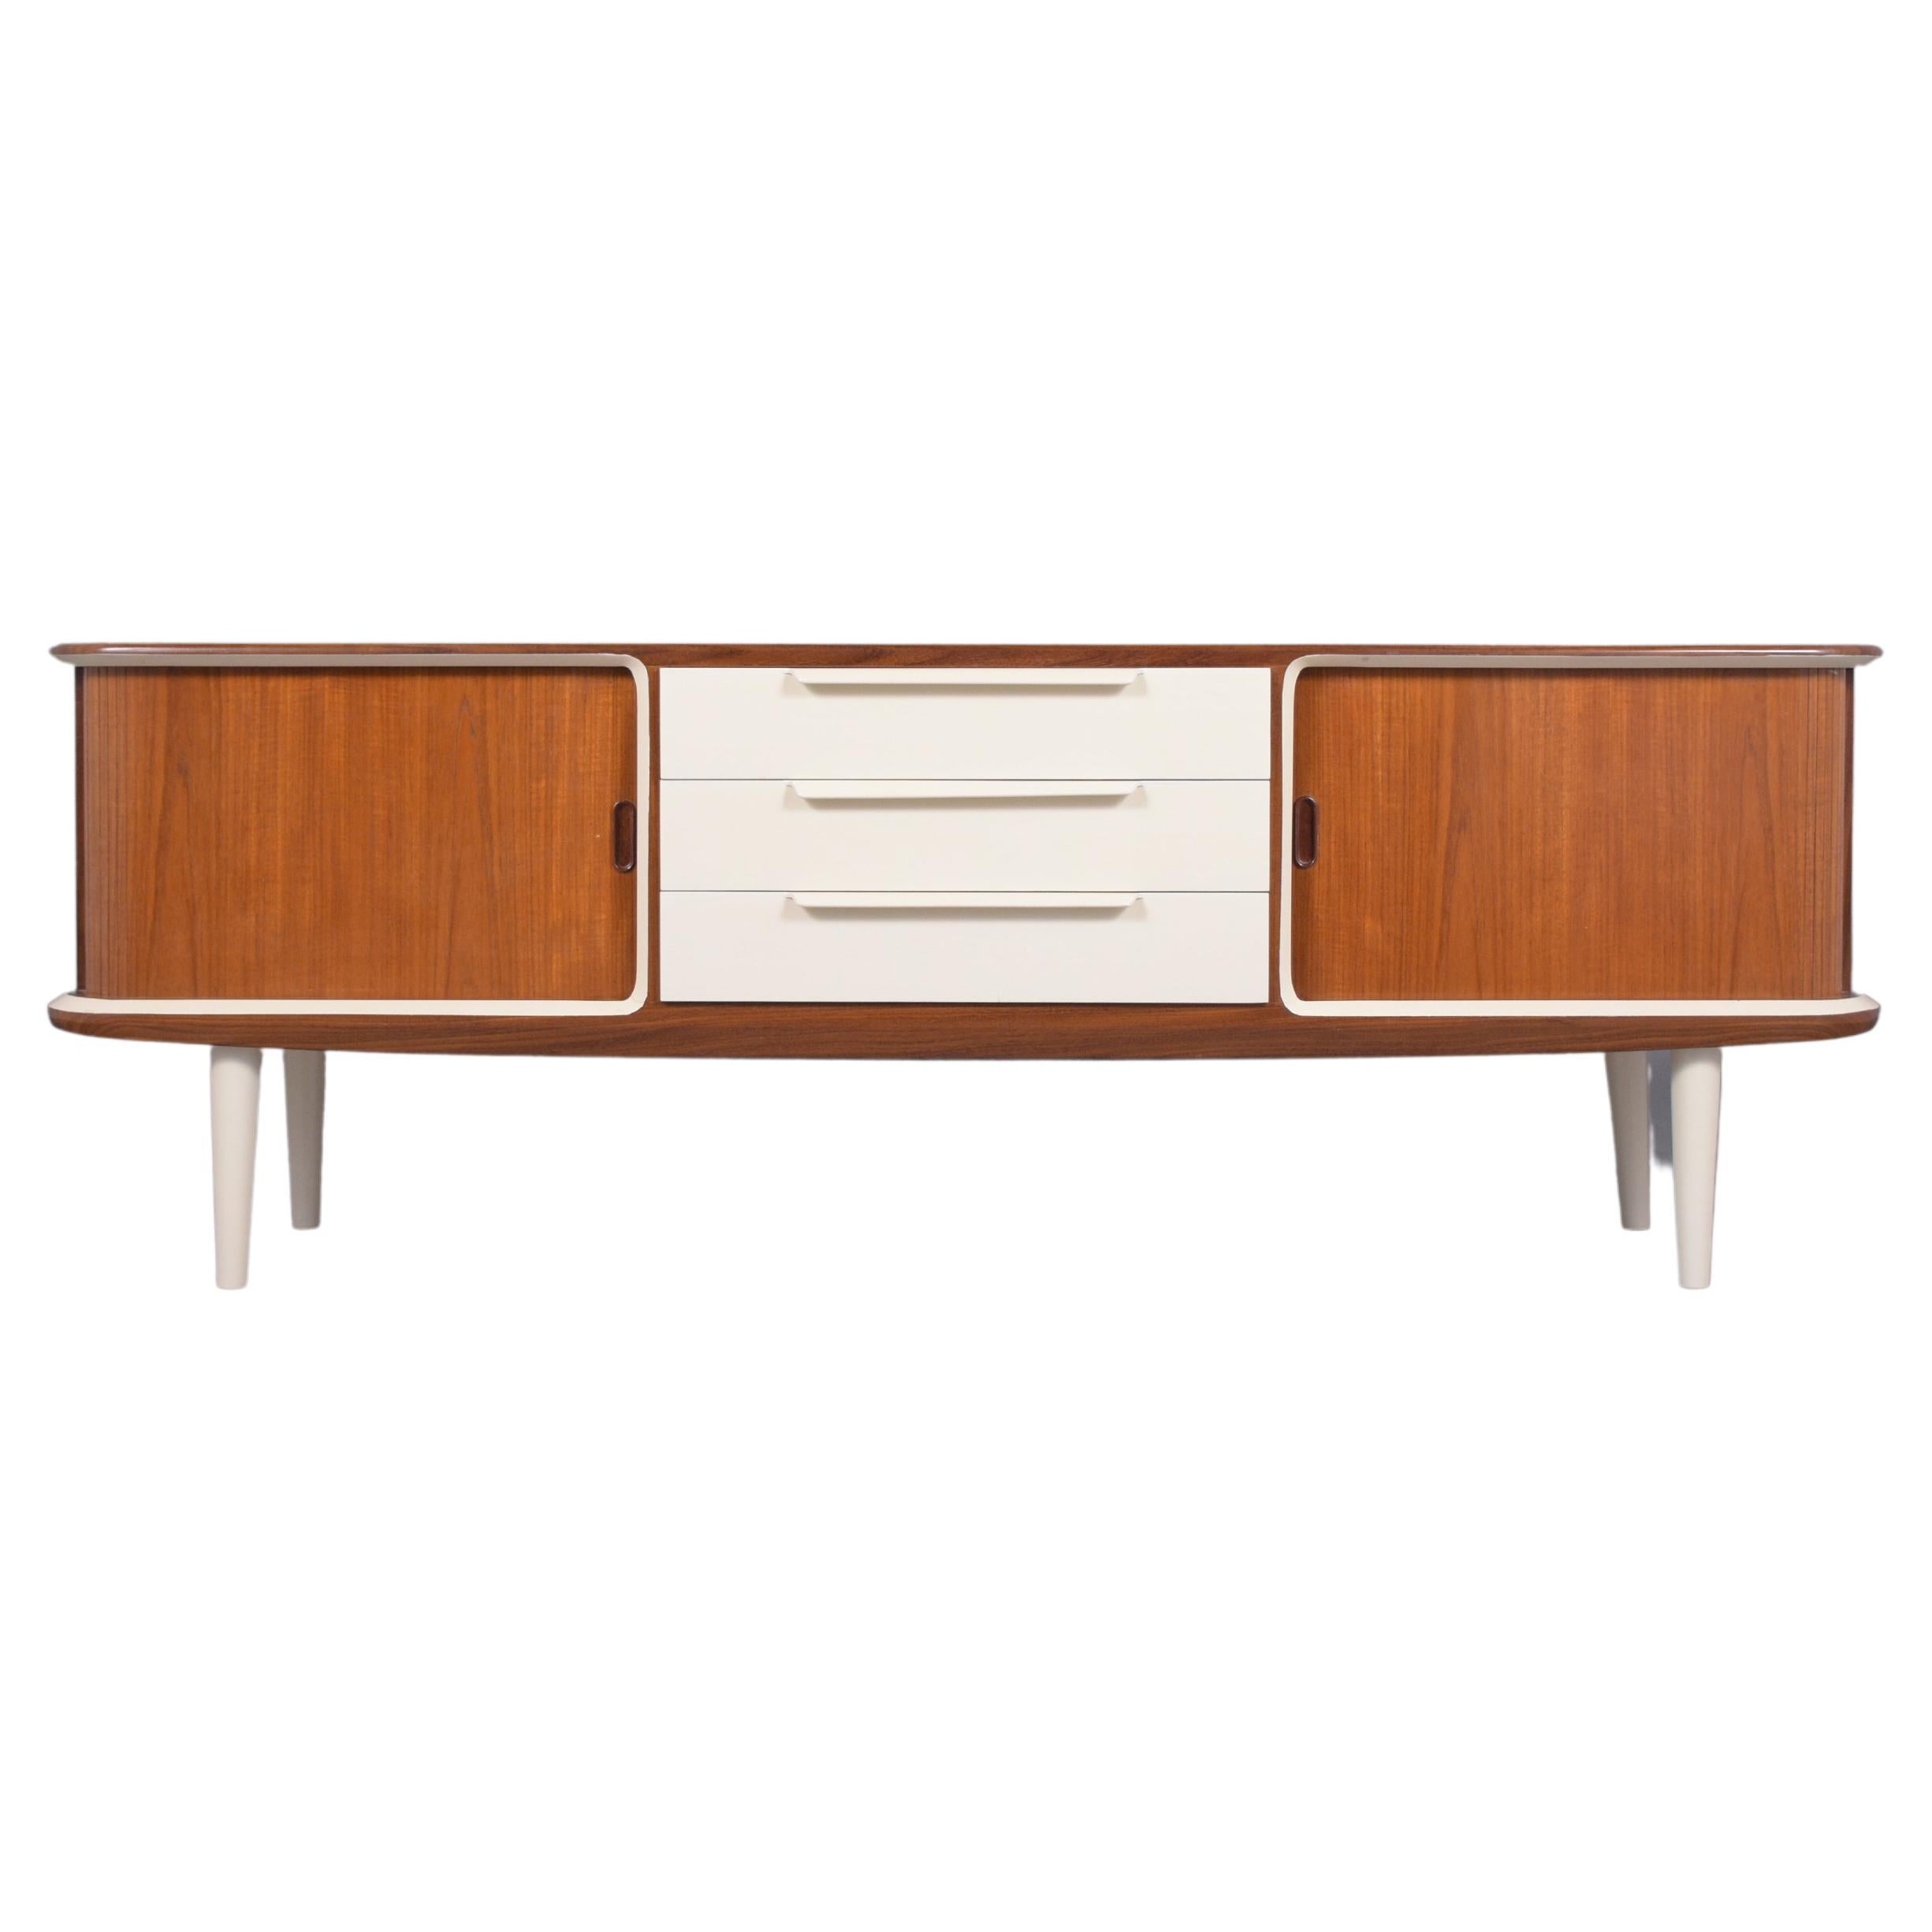 An extraordinary 1960s modern danish credenza is crafted out of teakwood and has been fully restored by our team of in-house craftsmen. The piece has been stained walnut with a newly lacquered finish and features beige accent color moldings